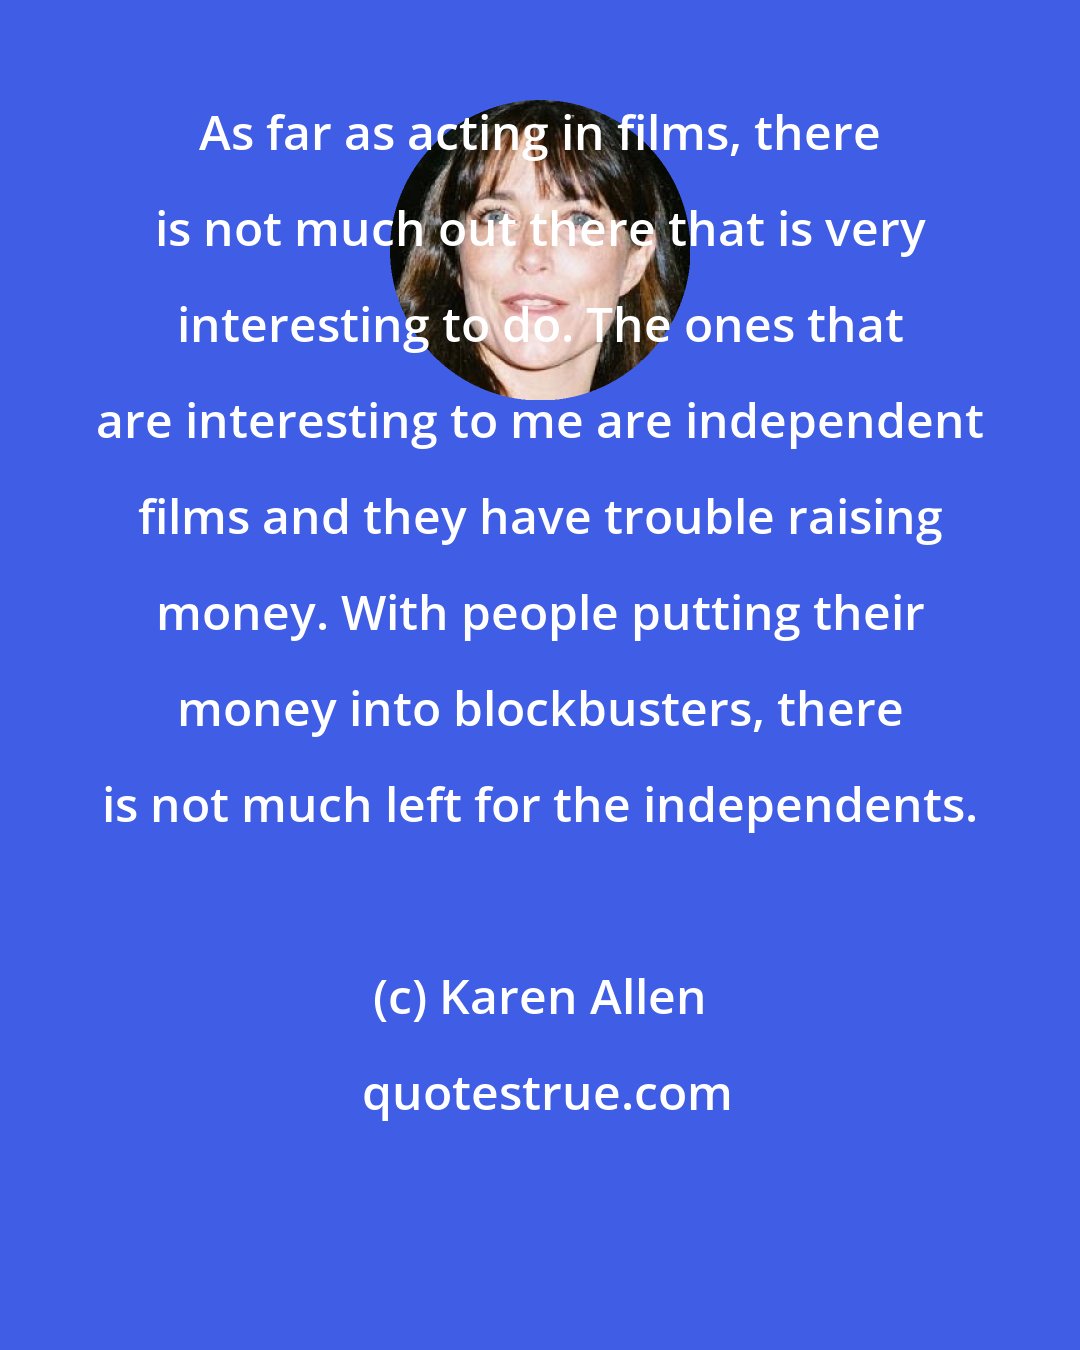 Karen Allen: As far as acting in films, there is not much out there that is very interesting to do. The ones that are interesting to me are independent films and they have trouble raising money. With people putting their money into blockbusters, there is not much left for the independents.